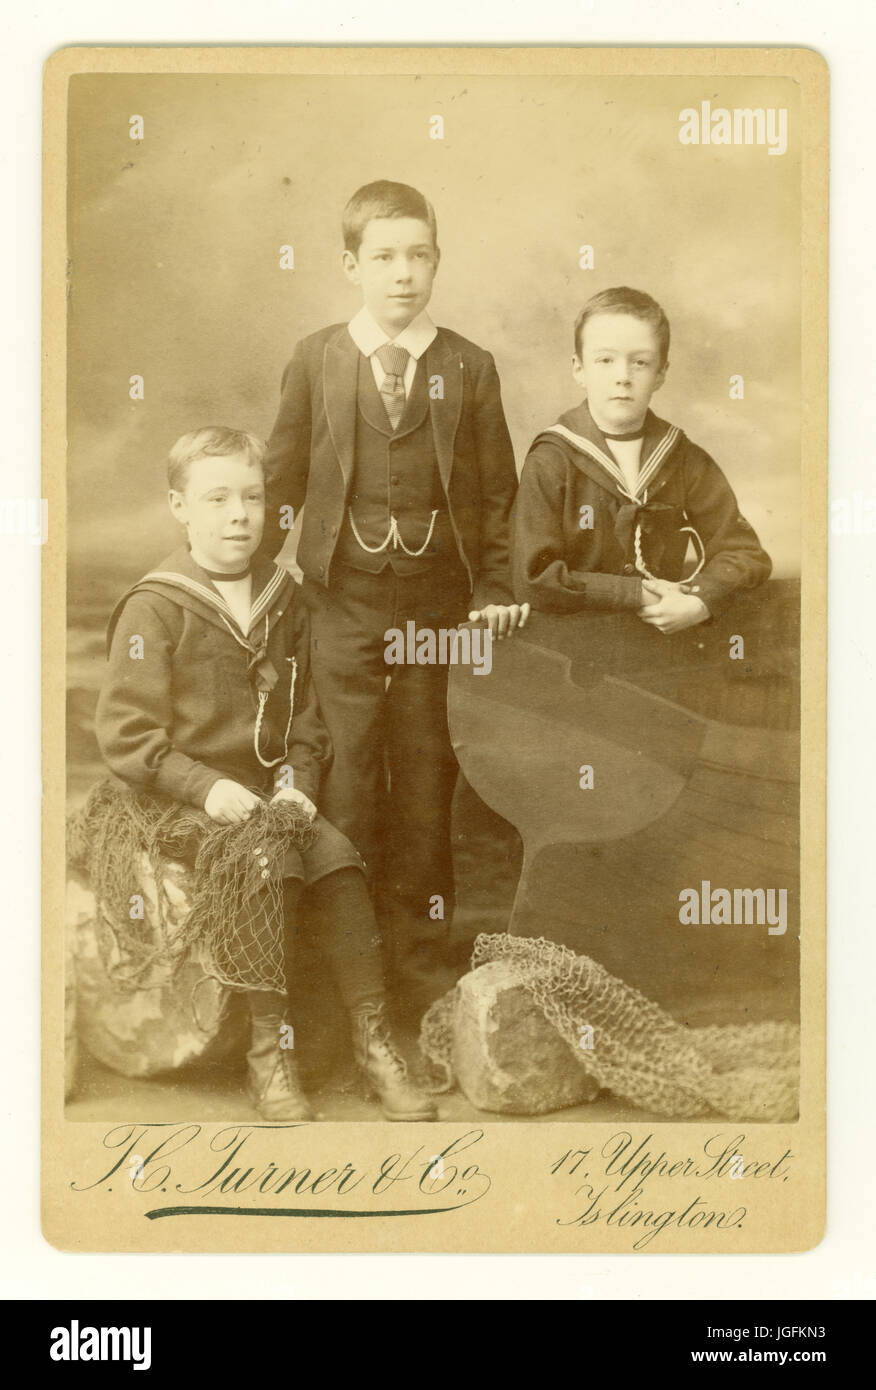 Original sepia-toned Cabinet card studio portrait with seaside backdrop of 3 young boys posing in sailor suits, dated 1888, Islington, London, U.K. Stock Photo